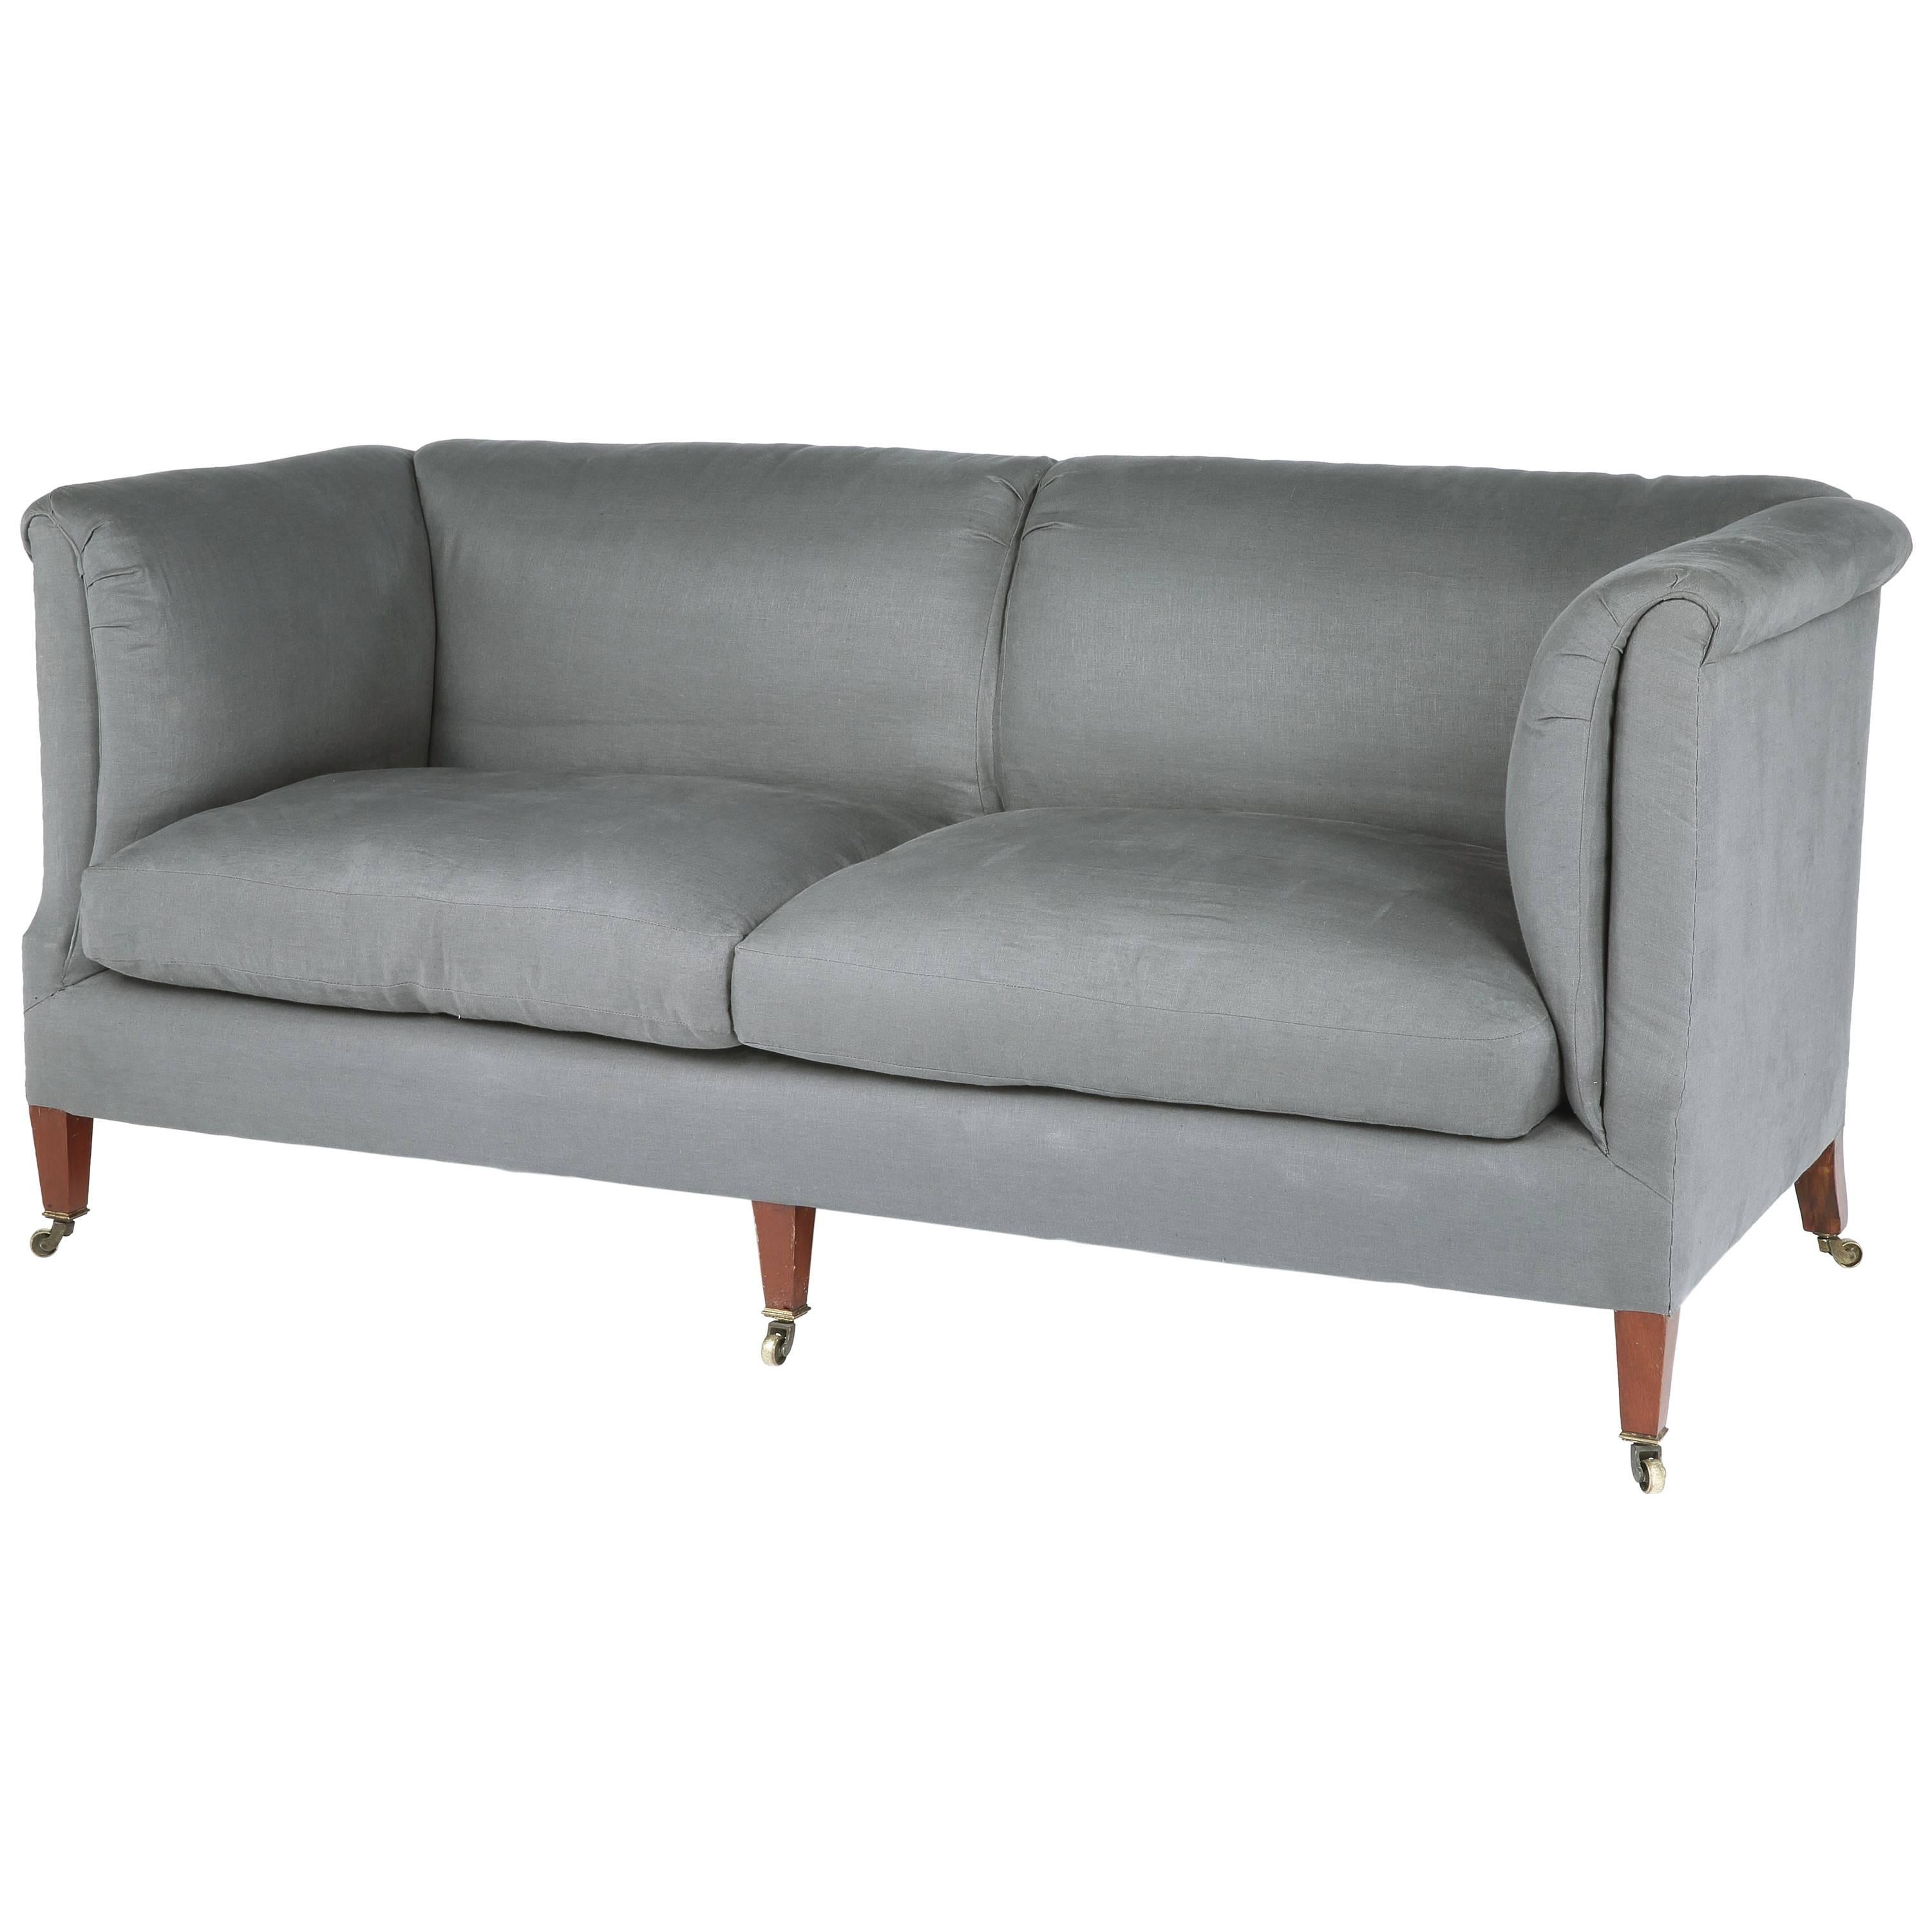 Mahogany and Upholstered Square-Sided "Baring" Sofa For Sale